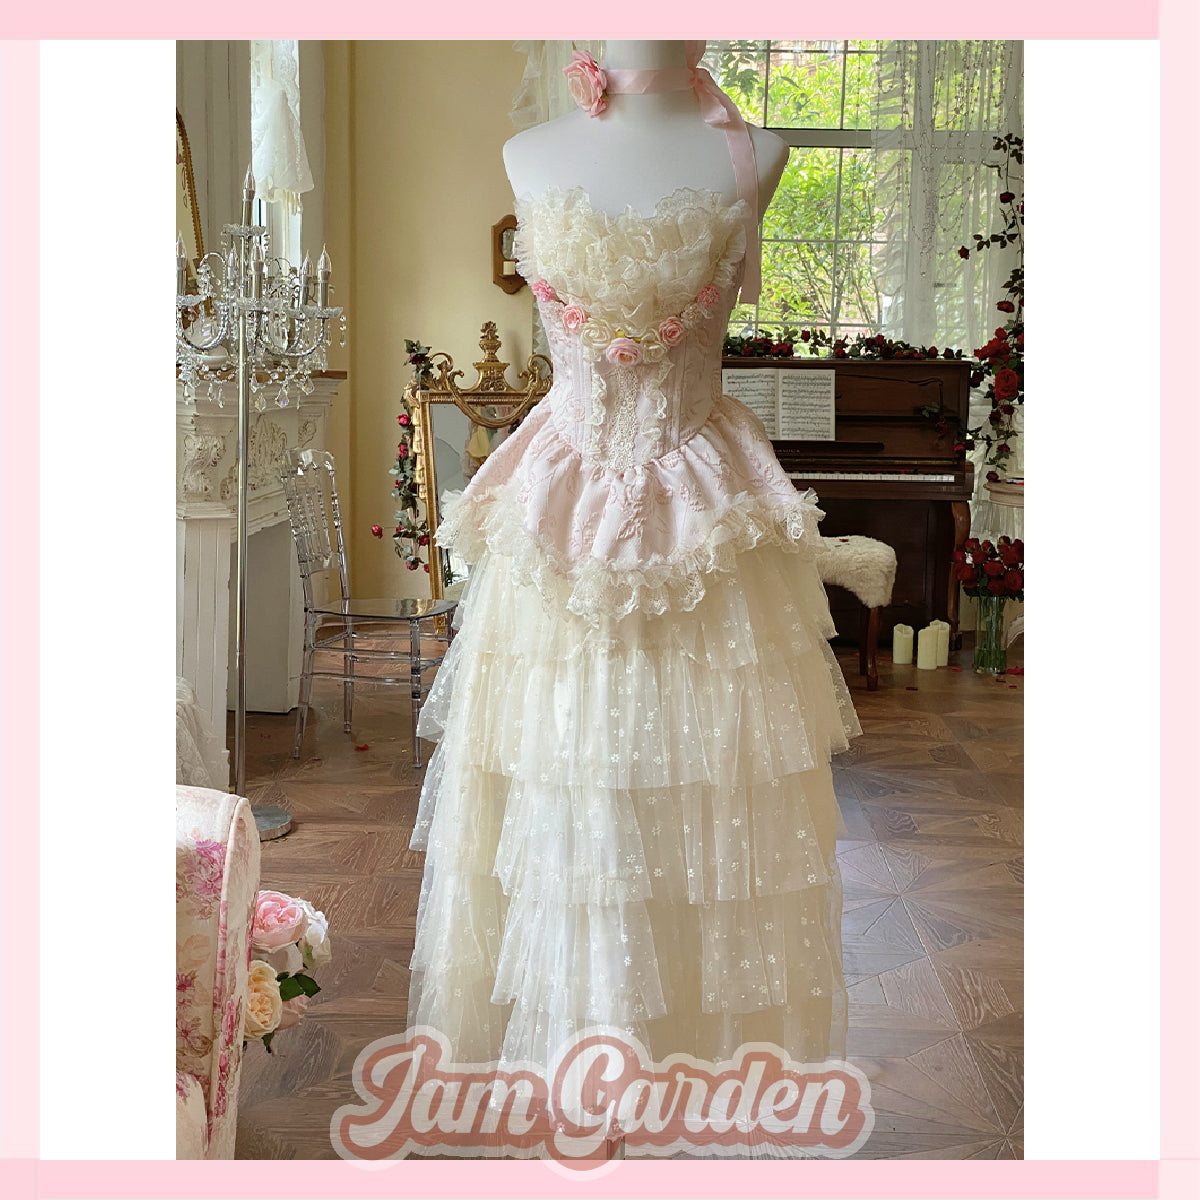 French Sweet Garden·Romantic French Gentle and Elegant Lace Long Dress Set